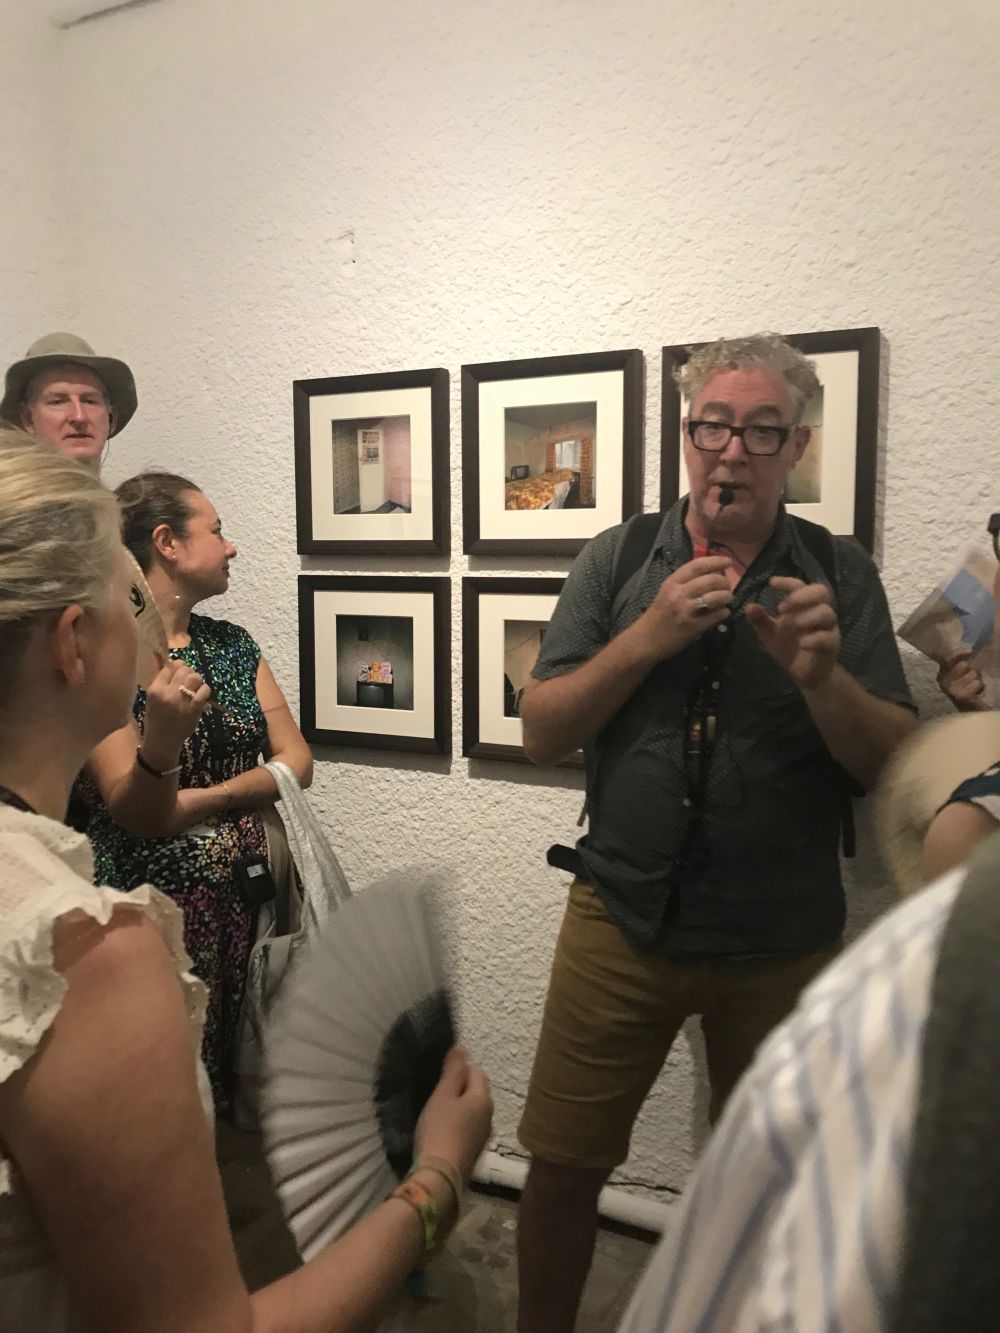 Image of david stewart talking about the photographs behind him in the gallery